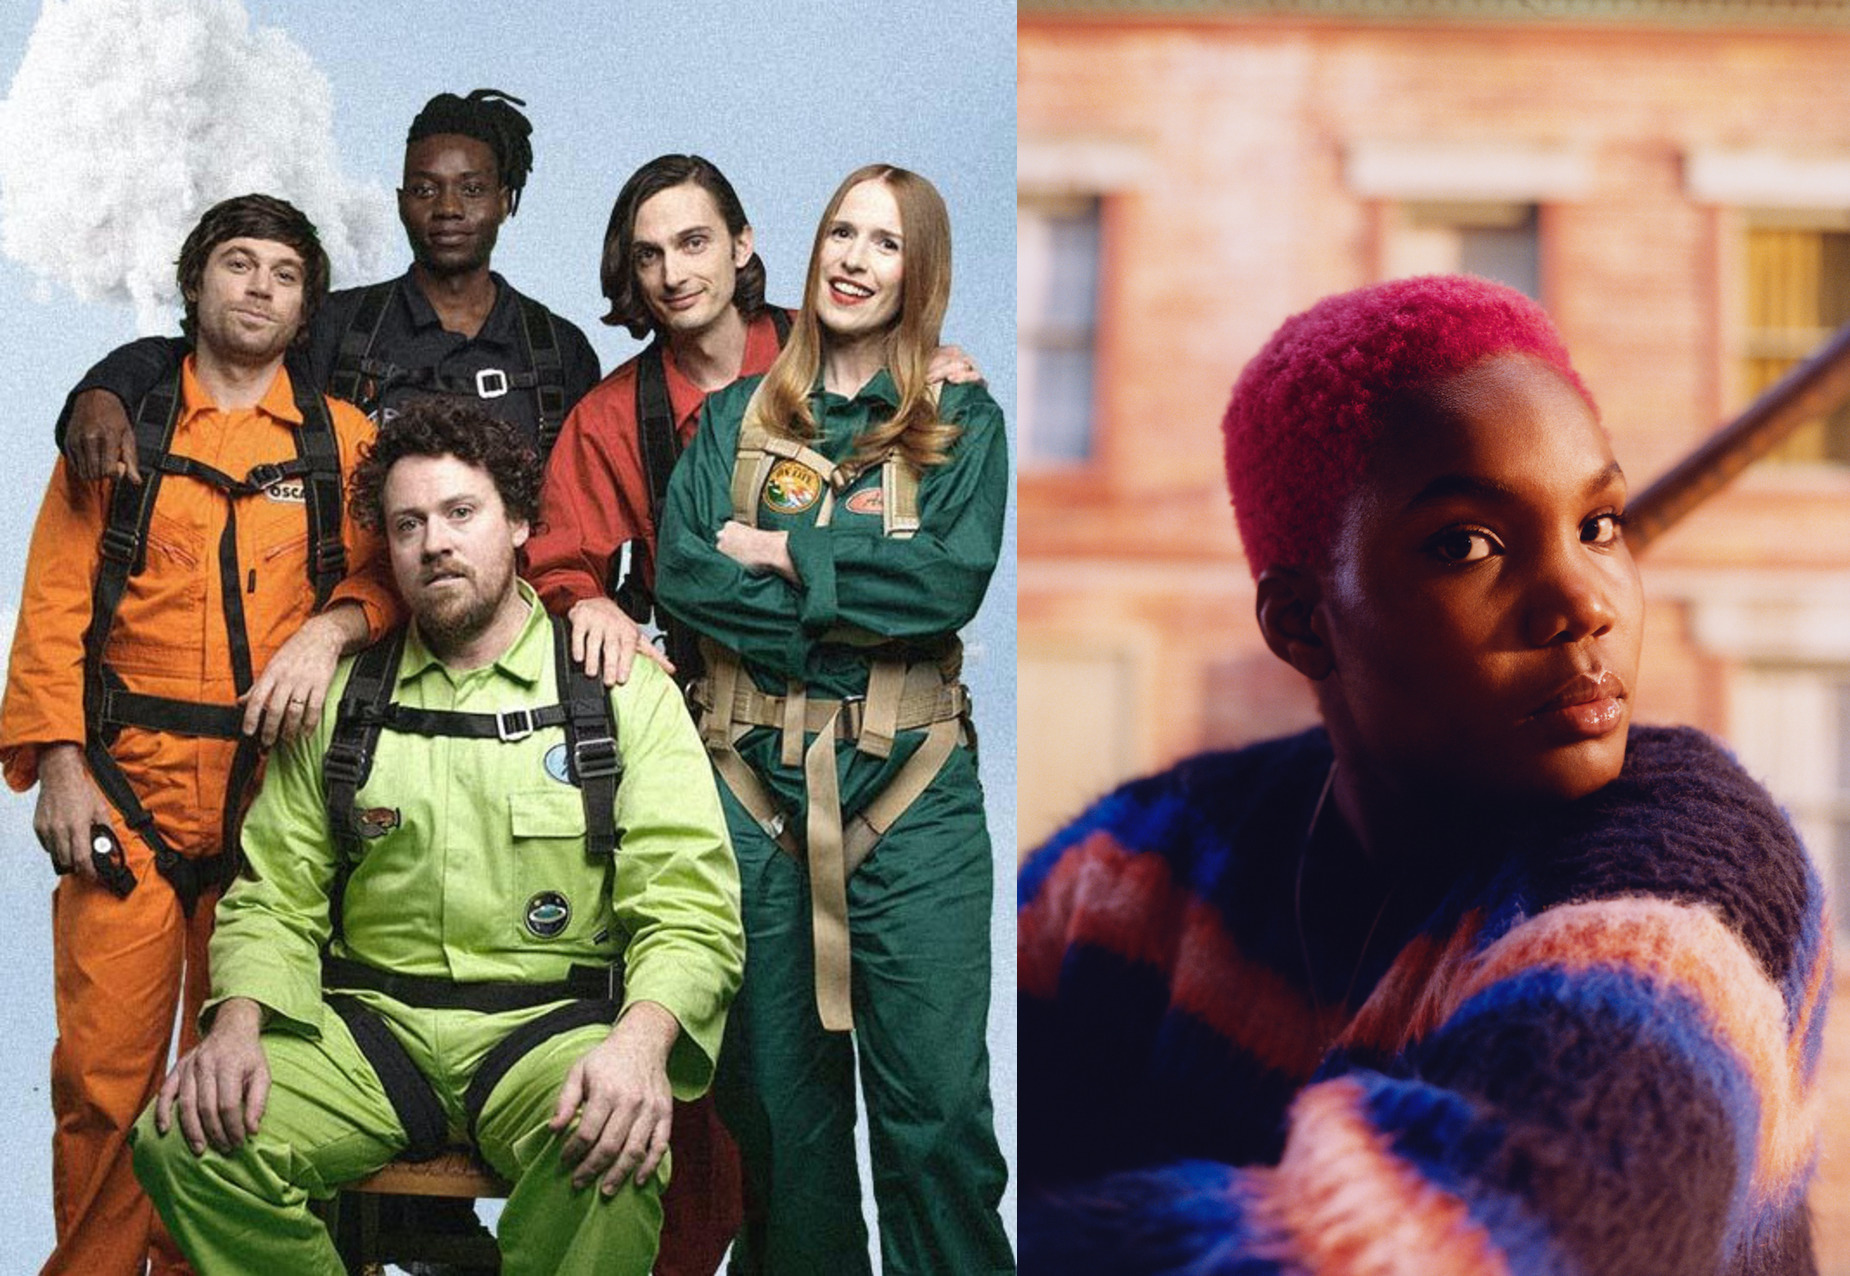 Iceland Airwaves Announces the 2022 Return With Metronomy and Arlo Parks